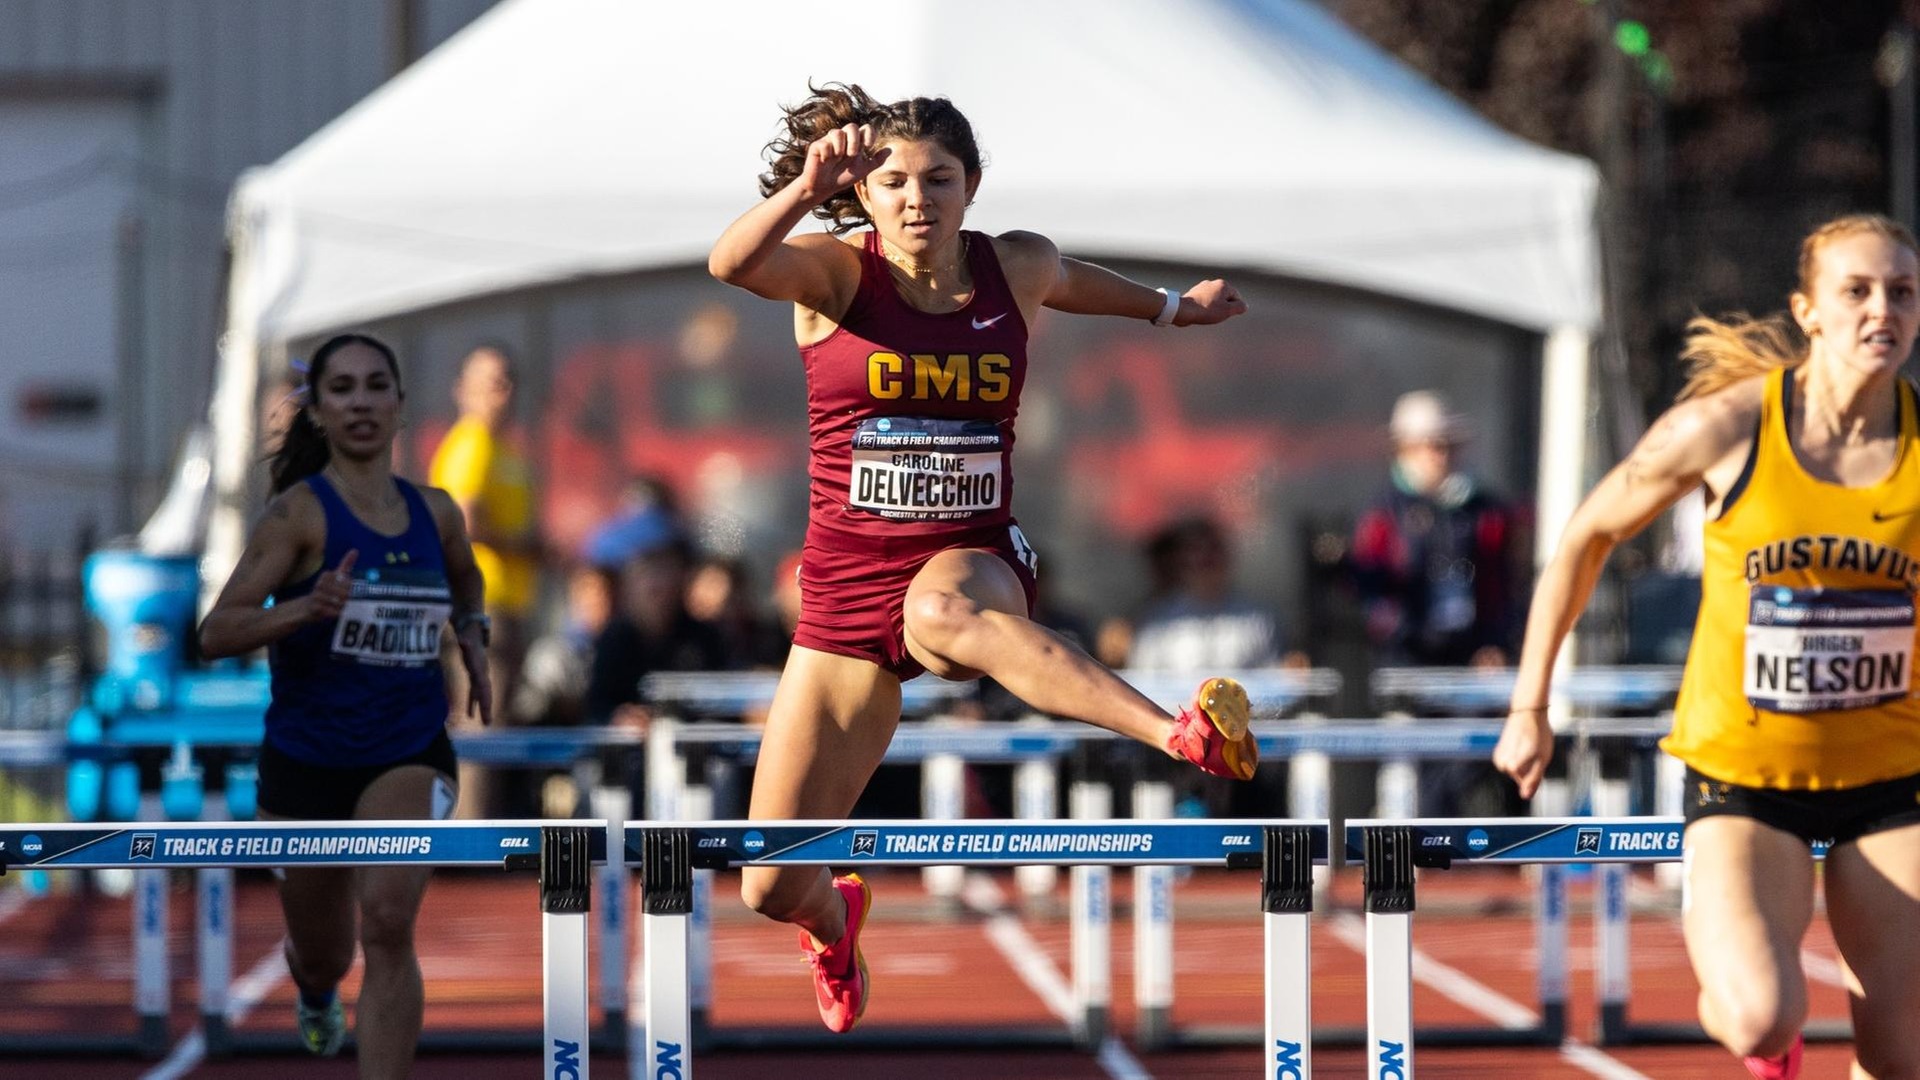 Caroline DelVecchio made the 400H finals for the second straight year (photo by Aaron Brewer)